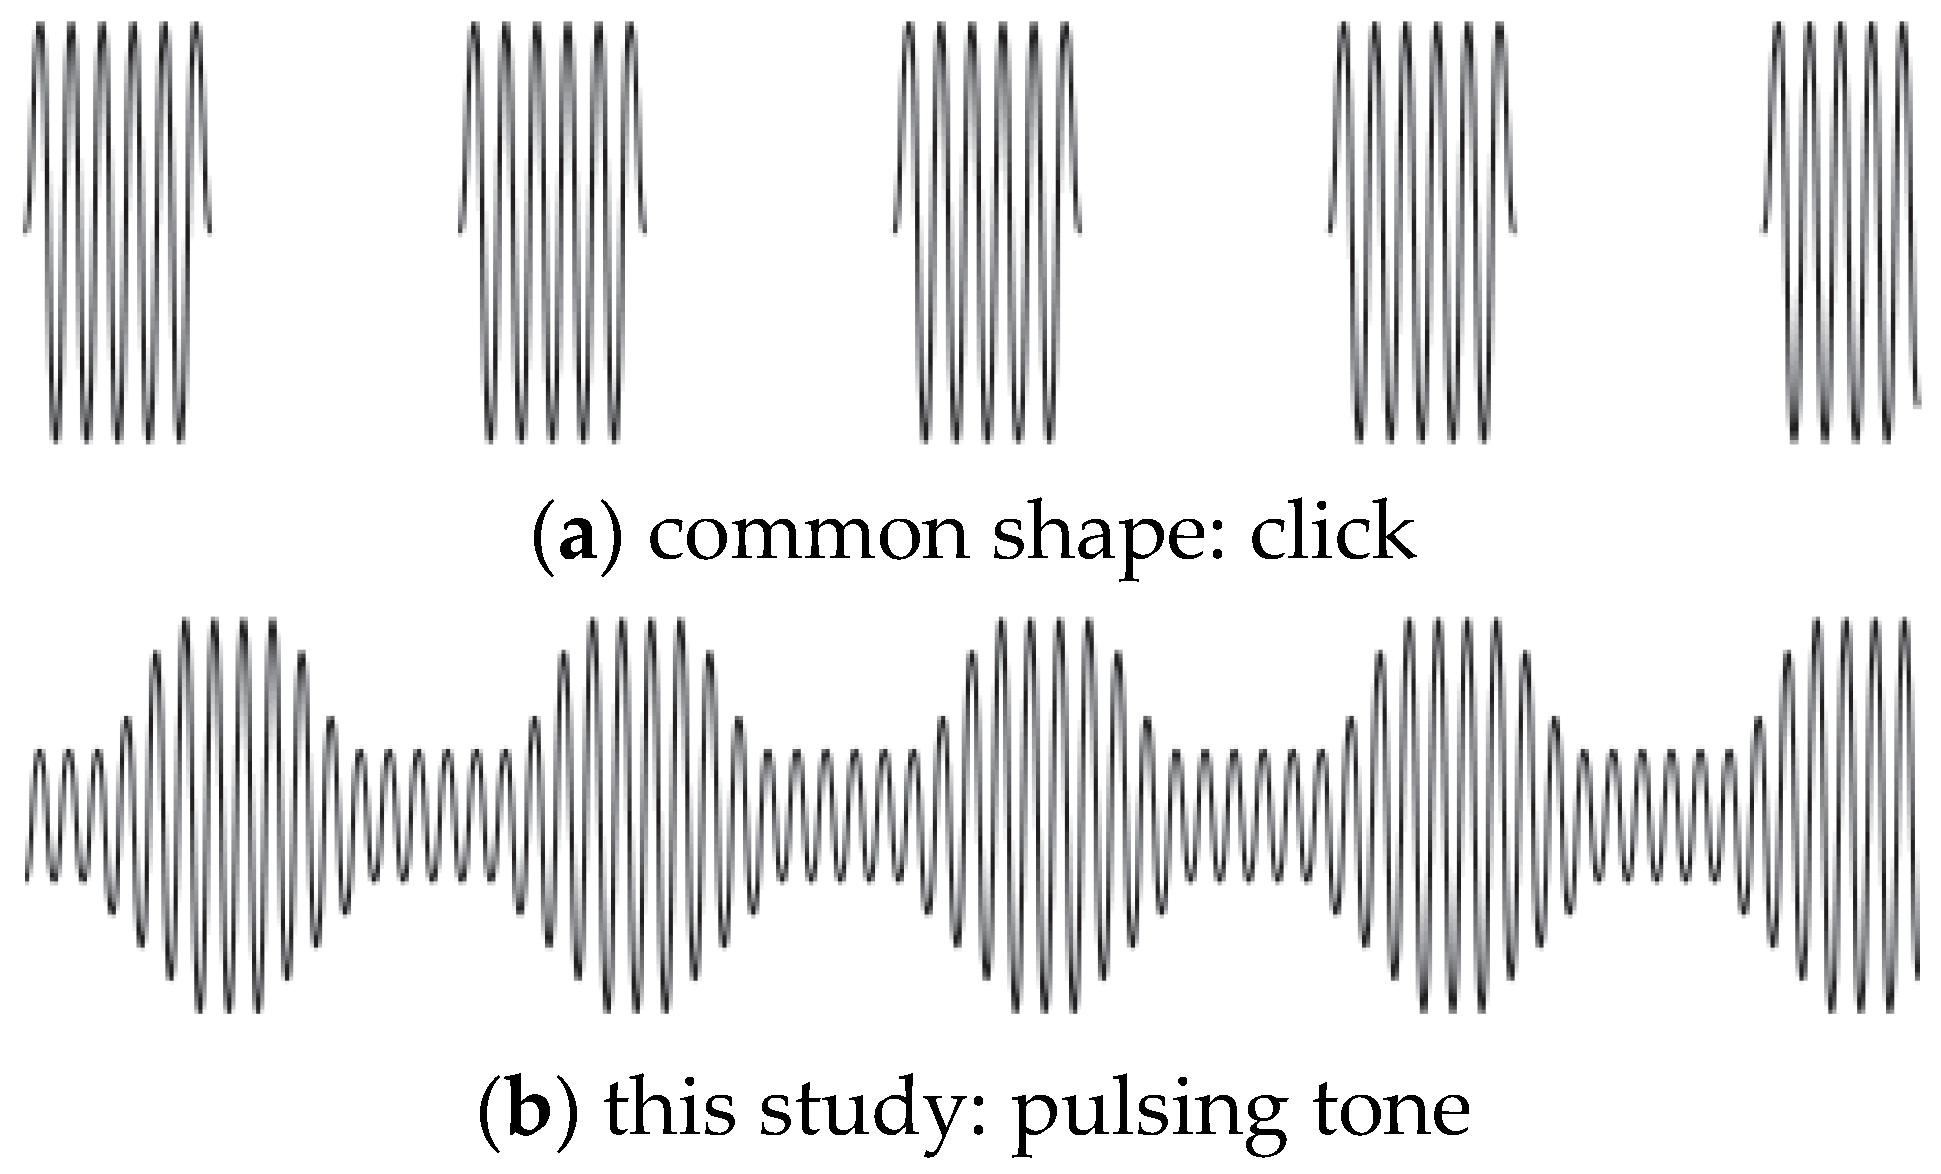 Biology and Life Sciences Free Full-Text | Rhythmically Enhanced Music as Analgesic for Pain: A Pilot, Non-Controlled Observational Study